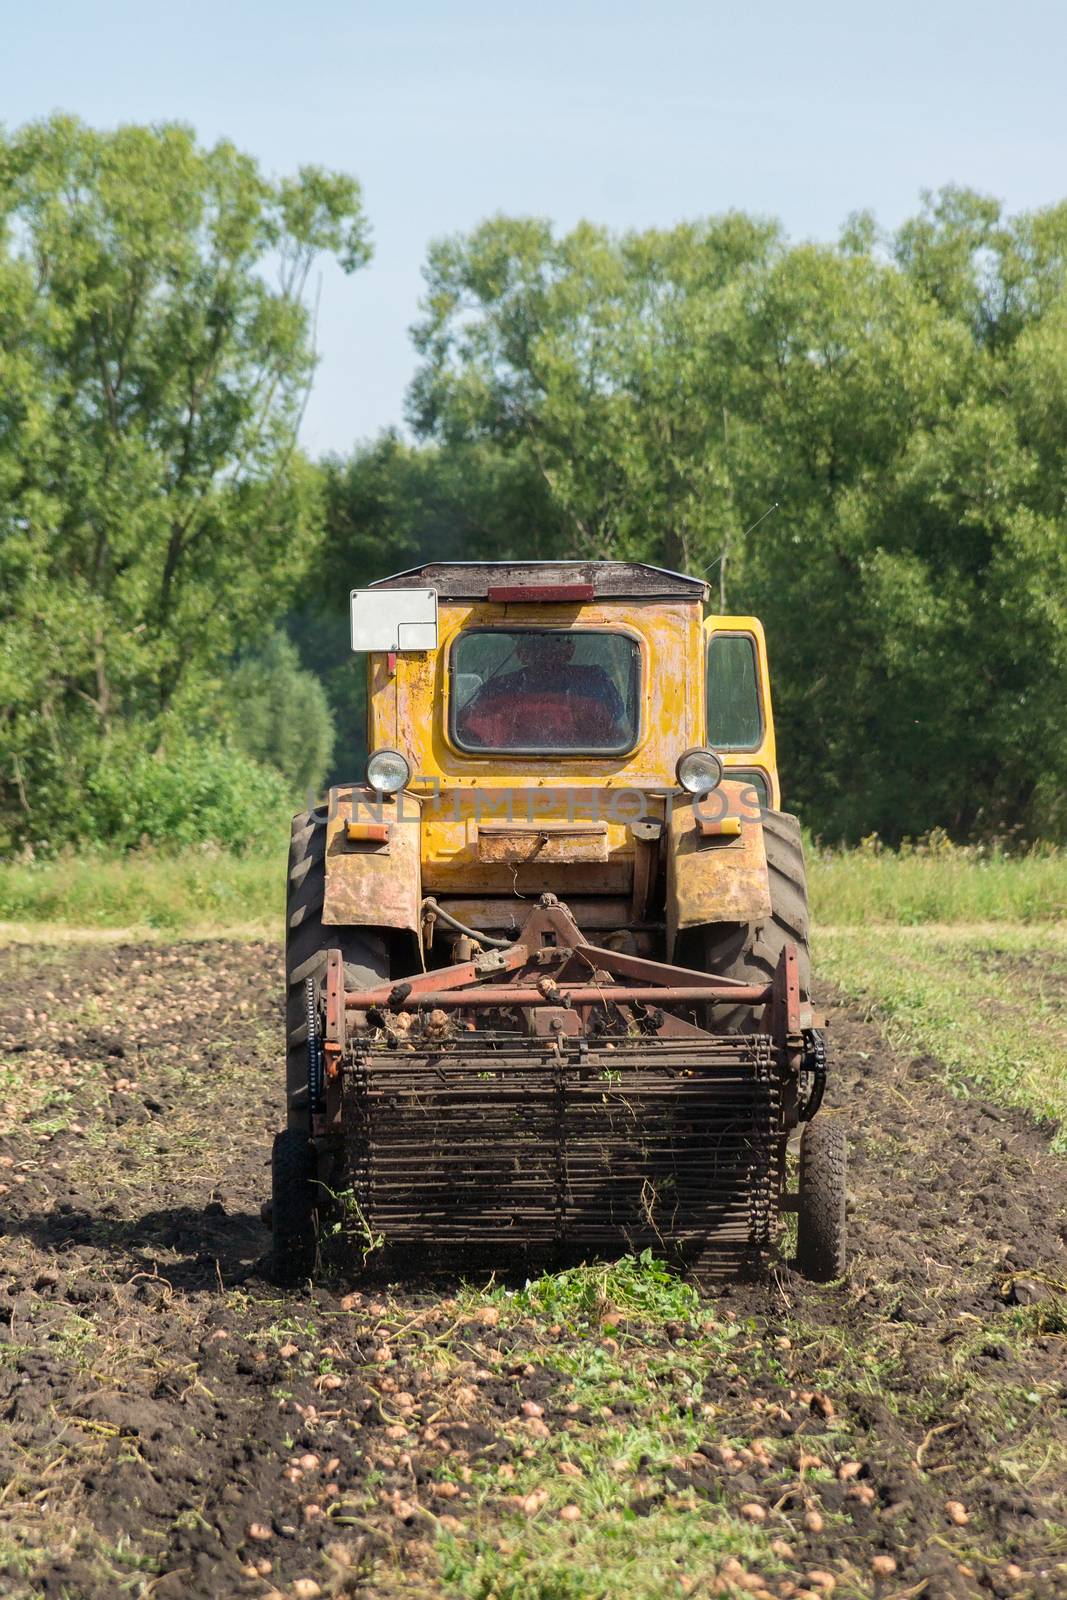 The photo depicts a tractor digging potatoes